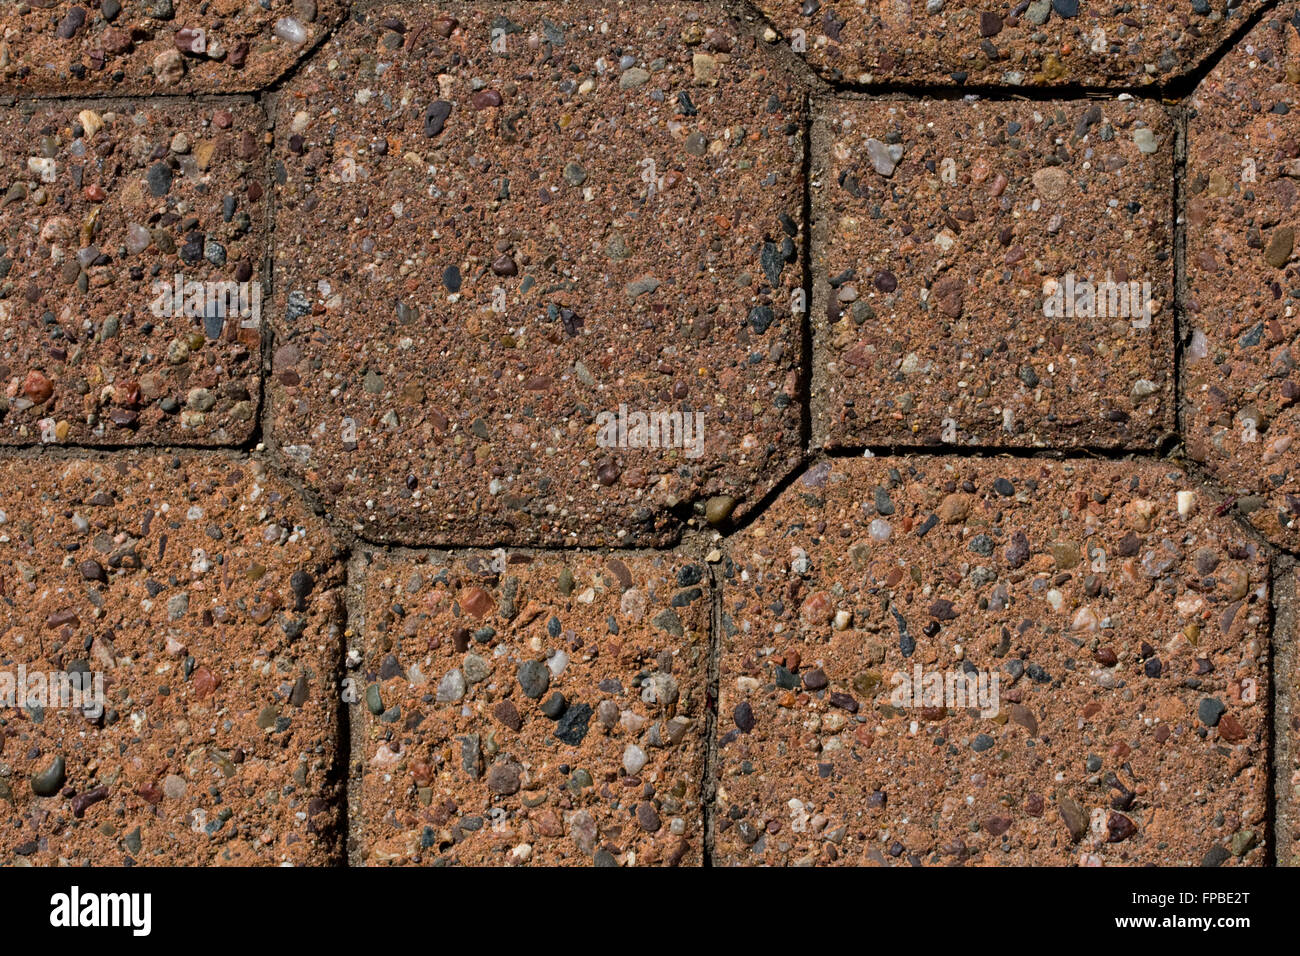 Close-up of Red Paving Stones Stock Photo